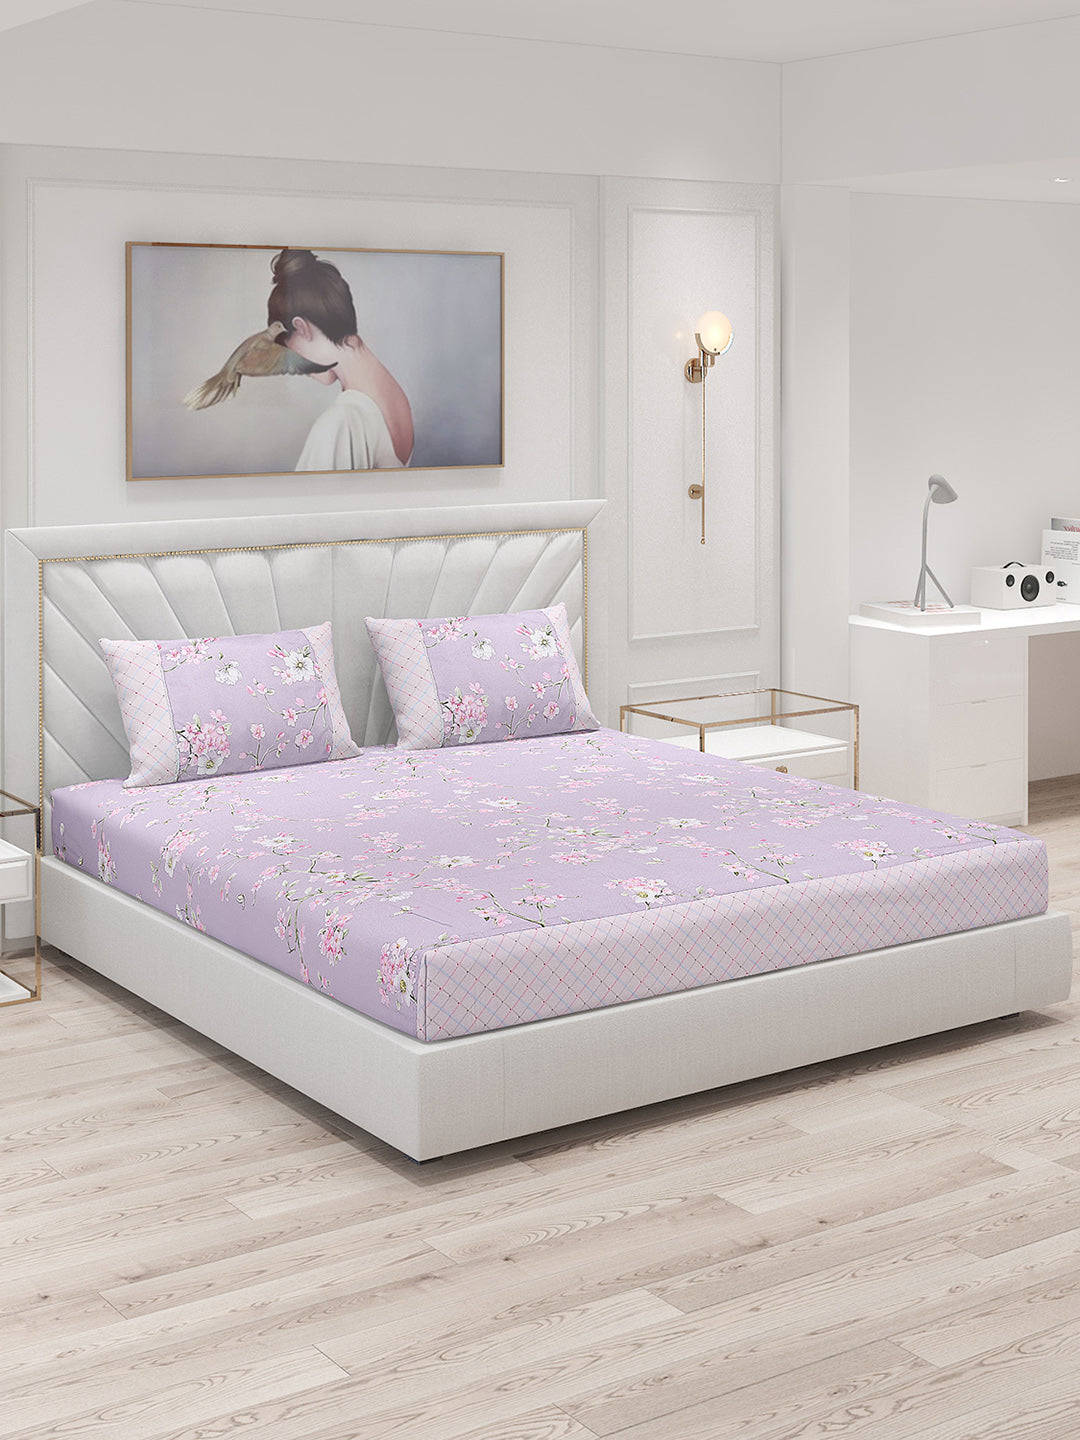 130 GSM Polyester Double Bed Bedsheet with 2 Pillow Covers